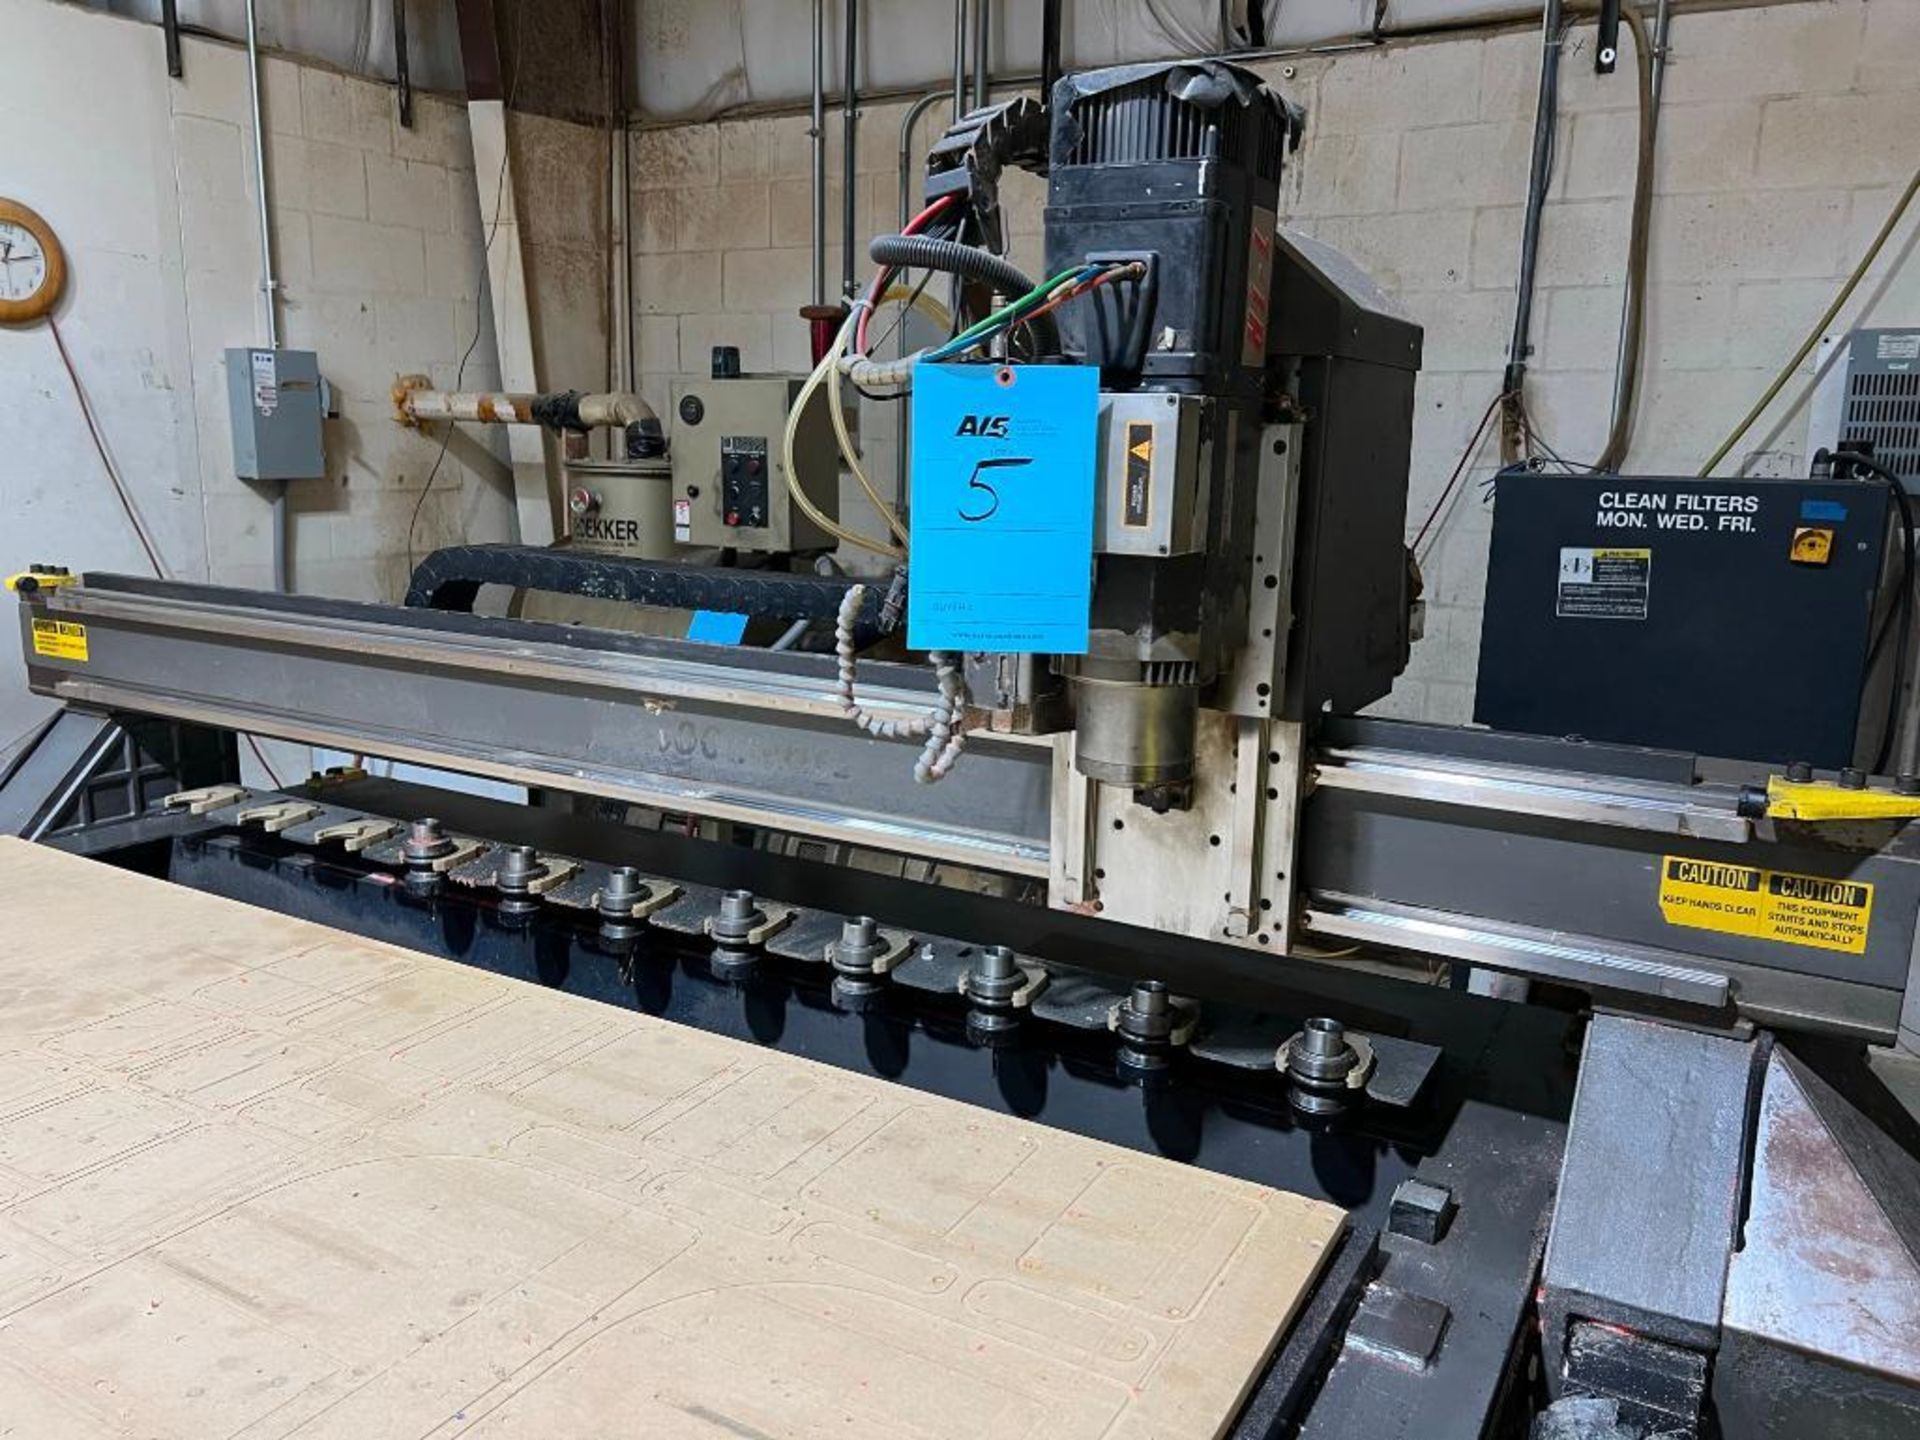 Multicam CNC Router Model 3305-R, S/N 3-305-R05361, 6' x 12' Table, with Tooling, Pendant Controls, - Image 5 of 16